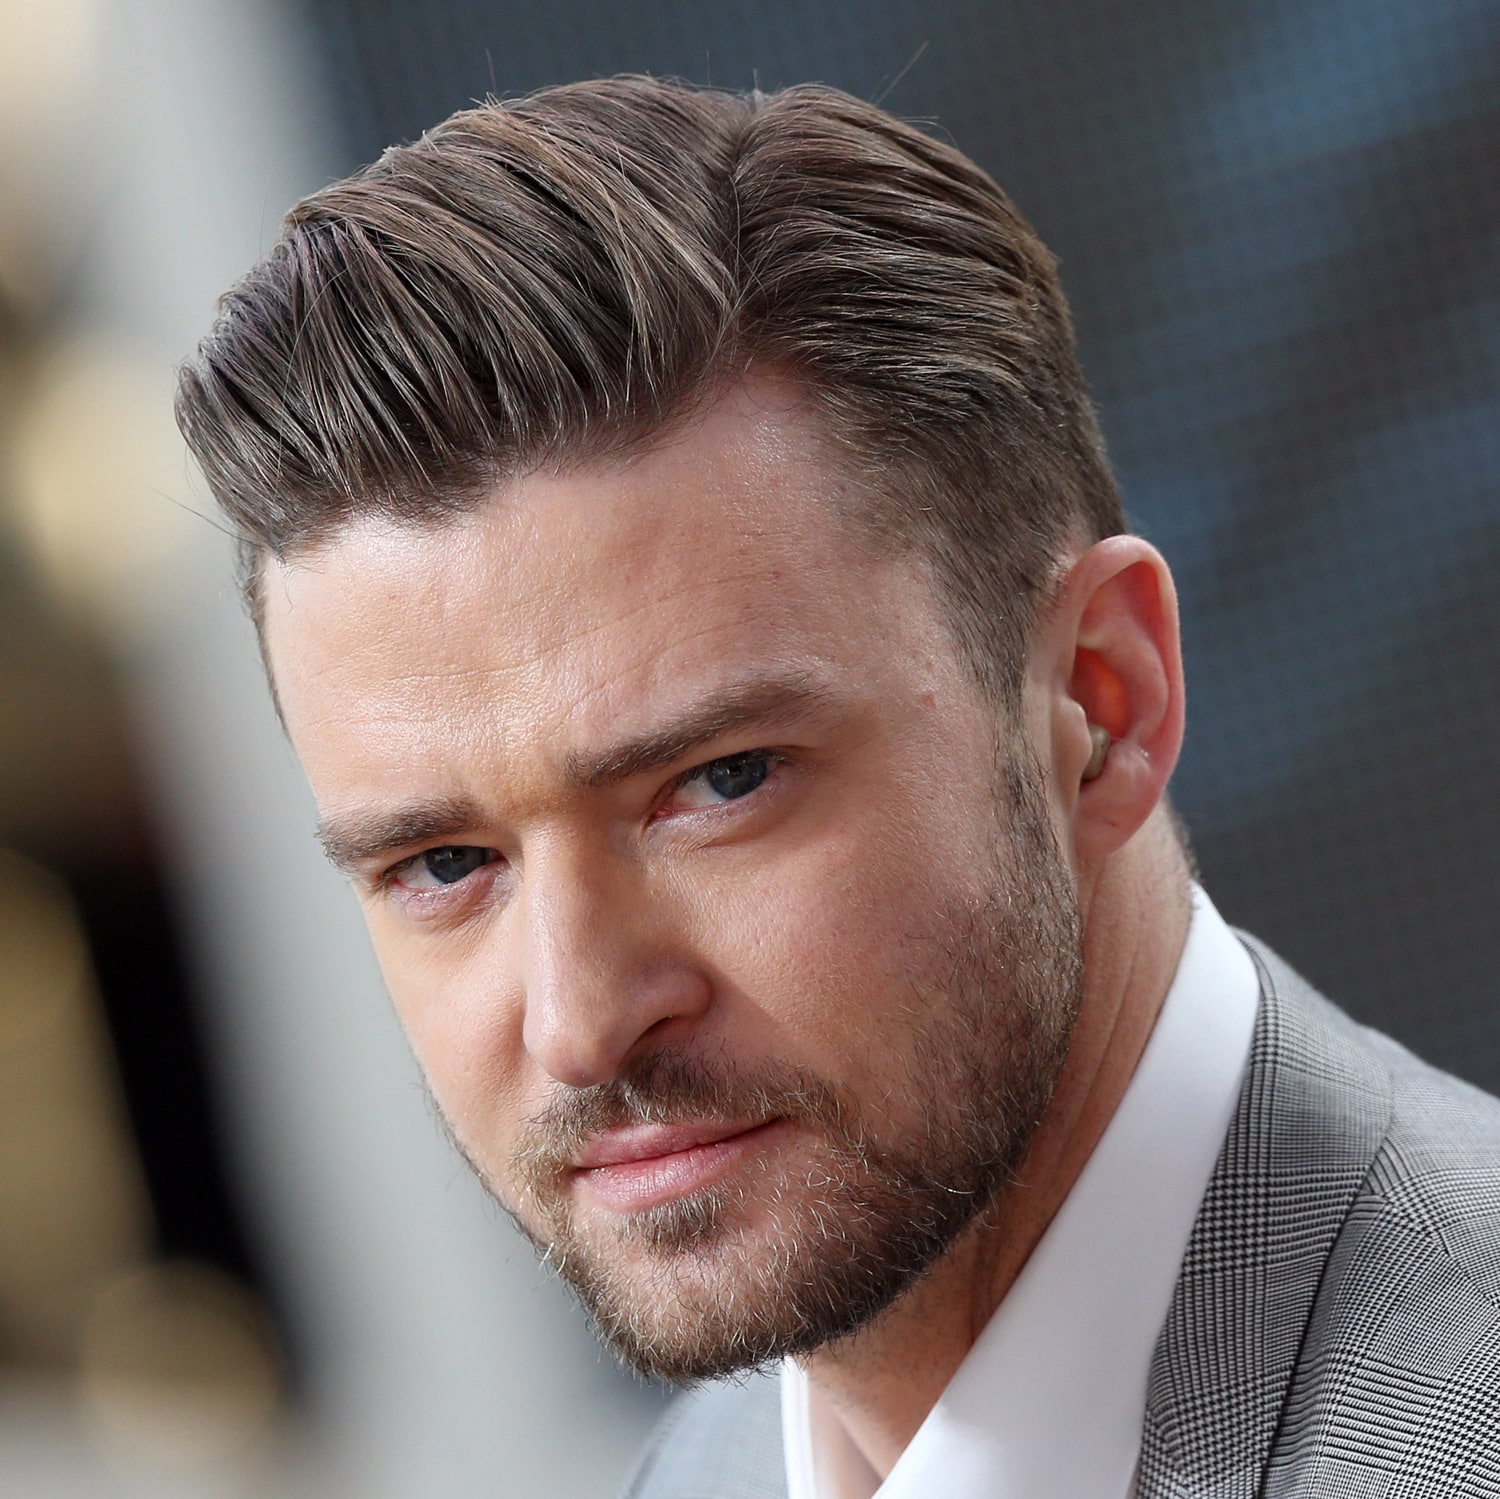 Justin-Timberlake-Slicked-Back-Side-Part-Hairstyle-LOIC-VENANCE_Getty-Images-.jpg